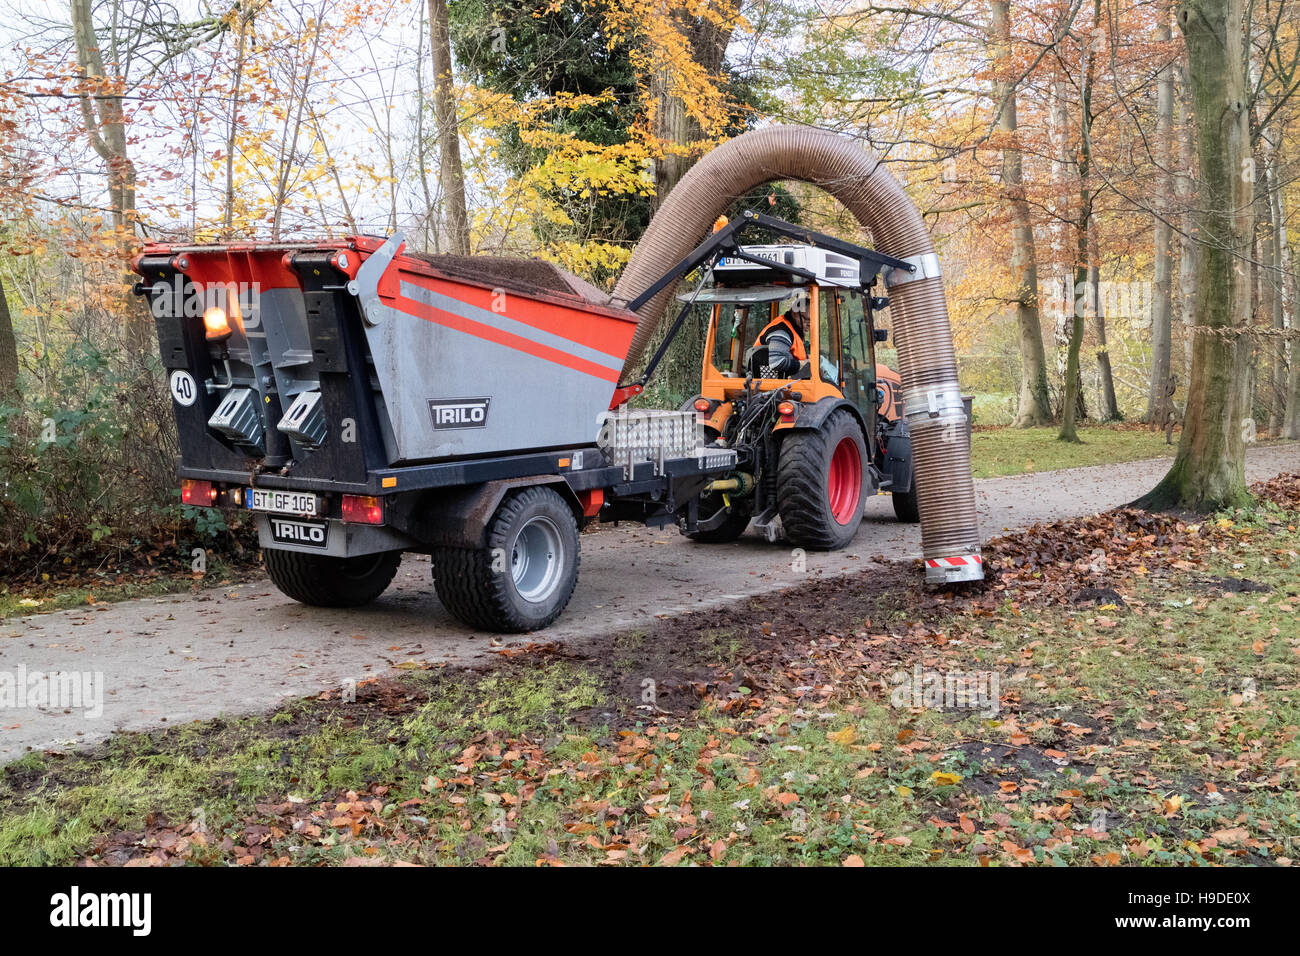 A machine in Germany to suck up leaves from the ground in autumn Stock Photo